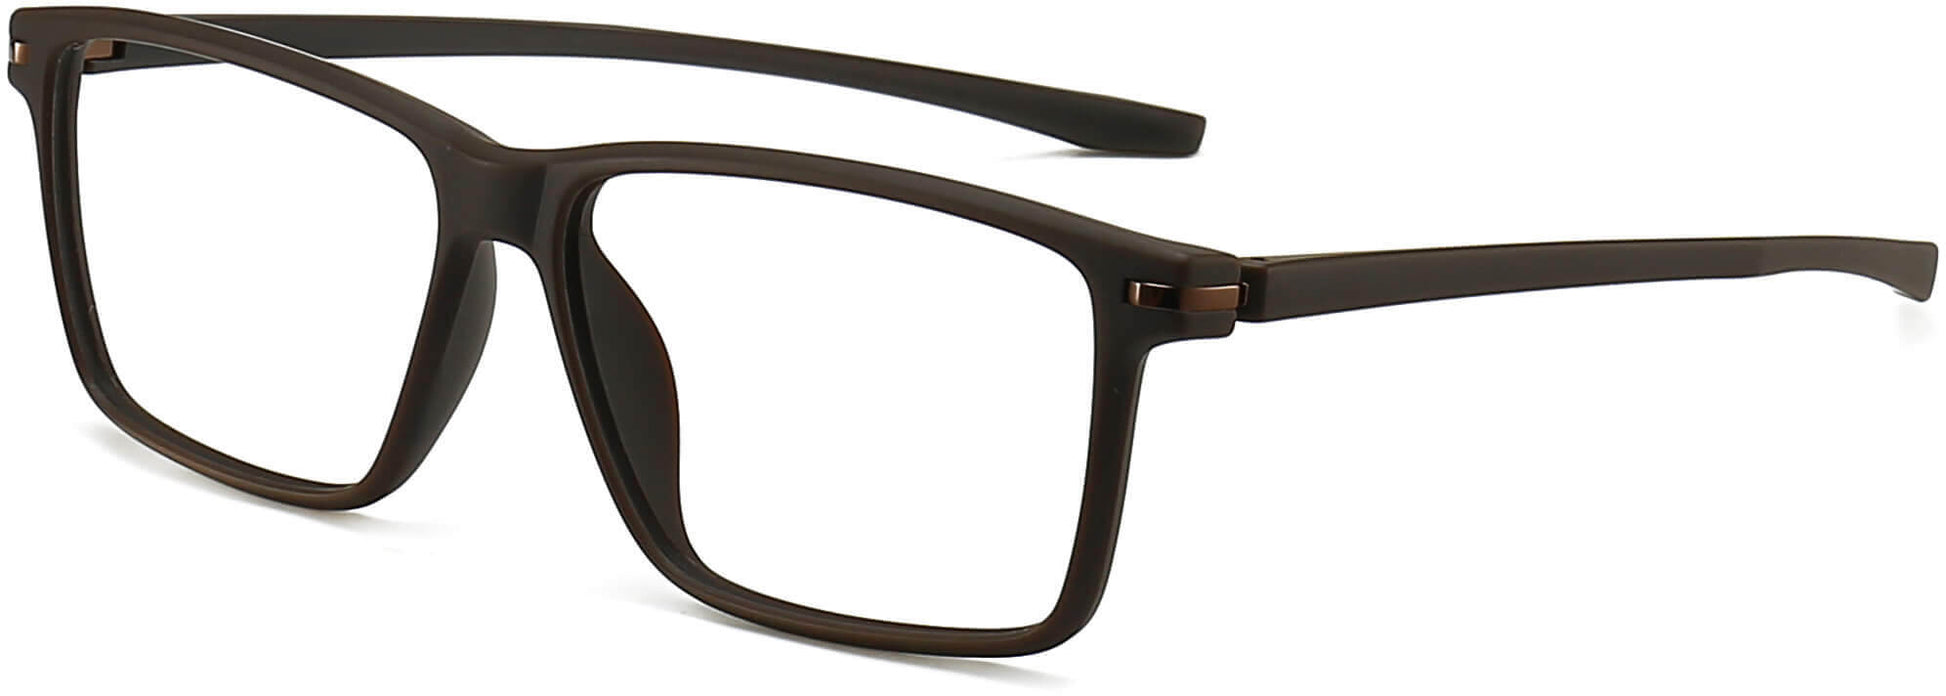 Kaiden Rectangle Brown Eyeglasses from ANRRI, angle view